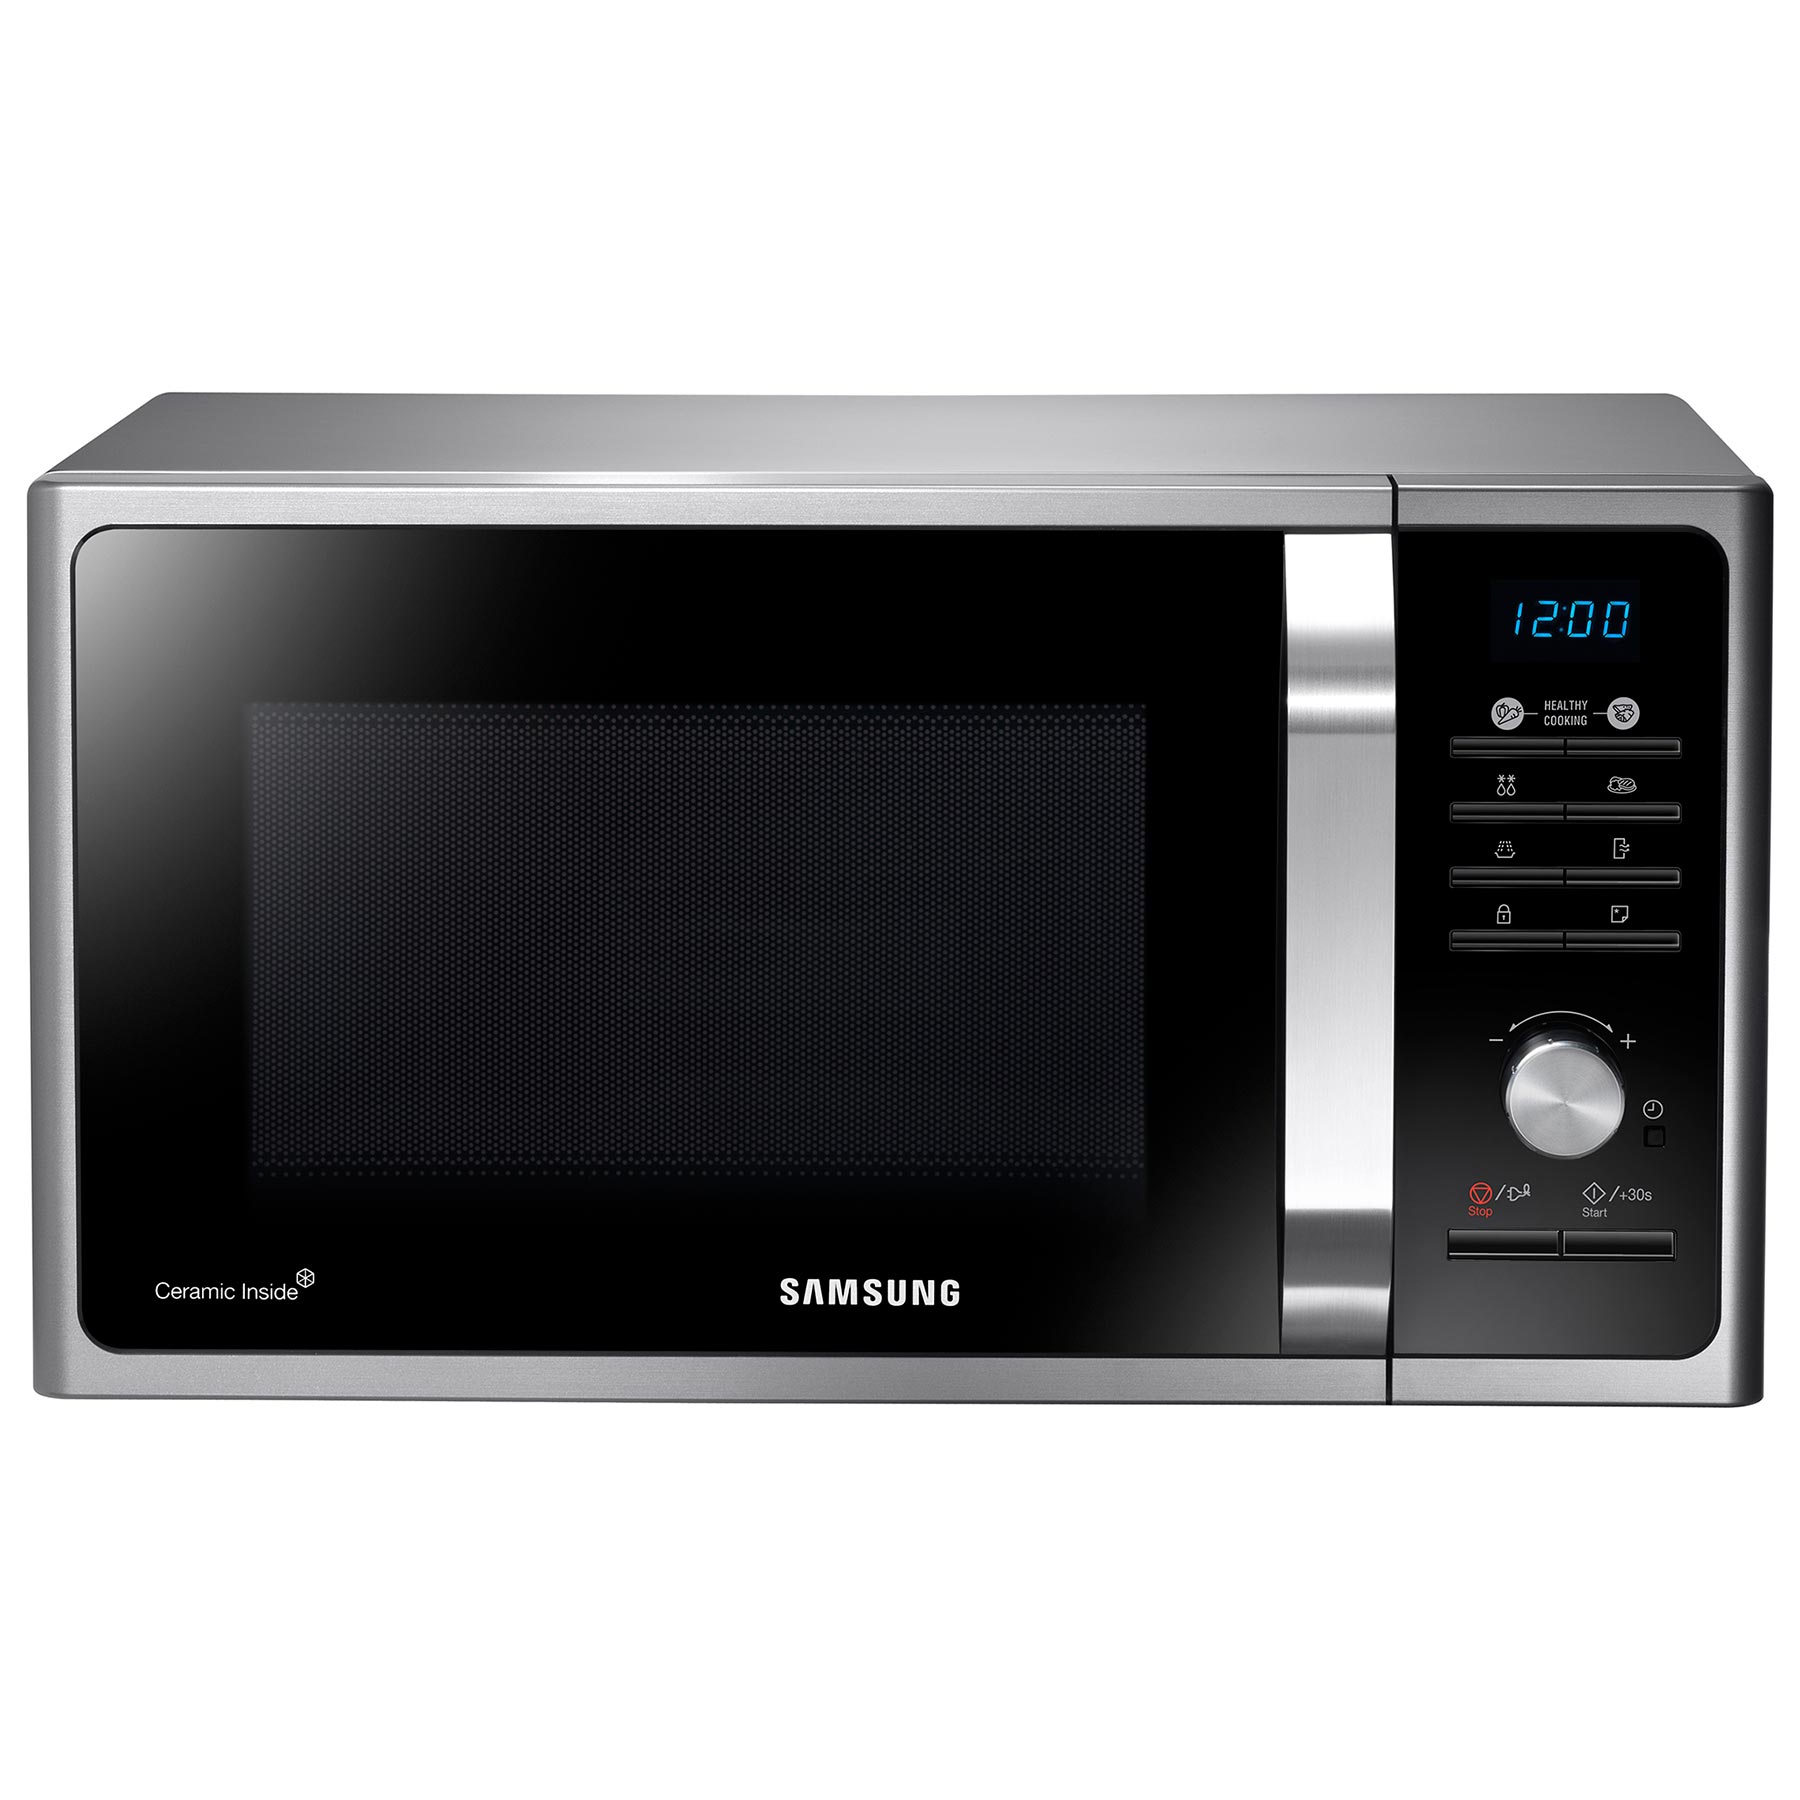 Image of Samsung MS23F301TAS Microwave Oven in Silver Tact 23 Litre 800W